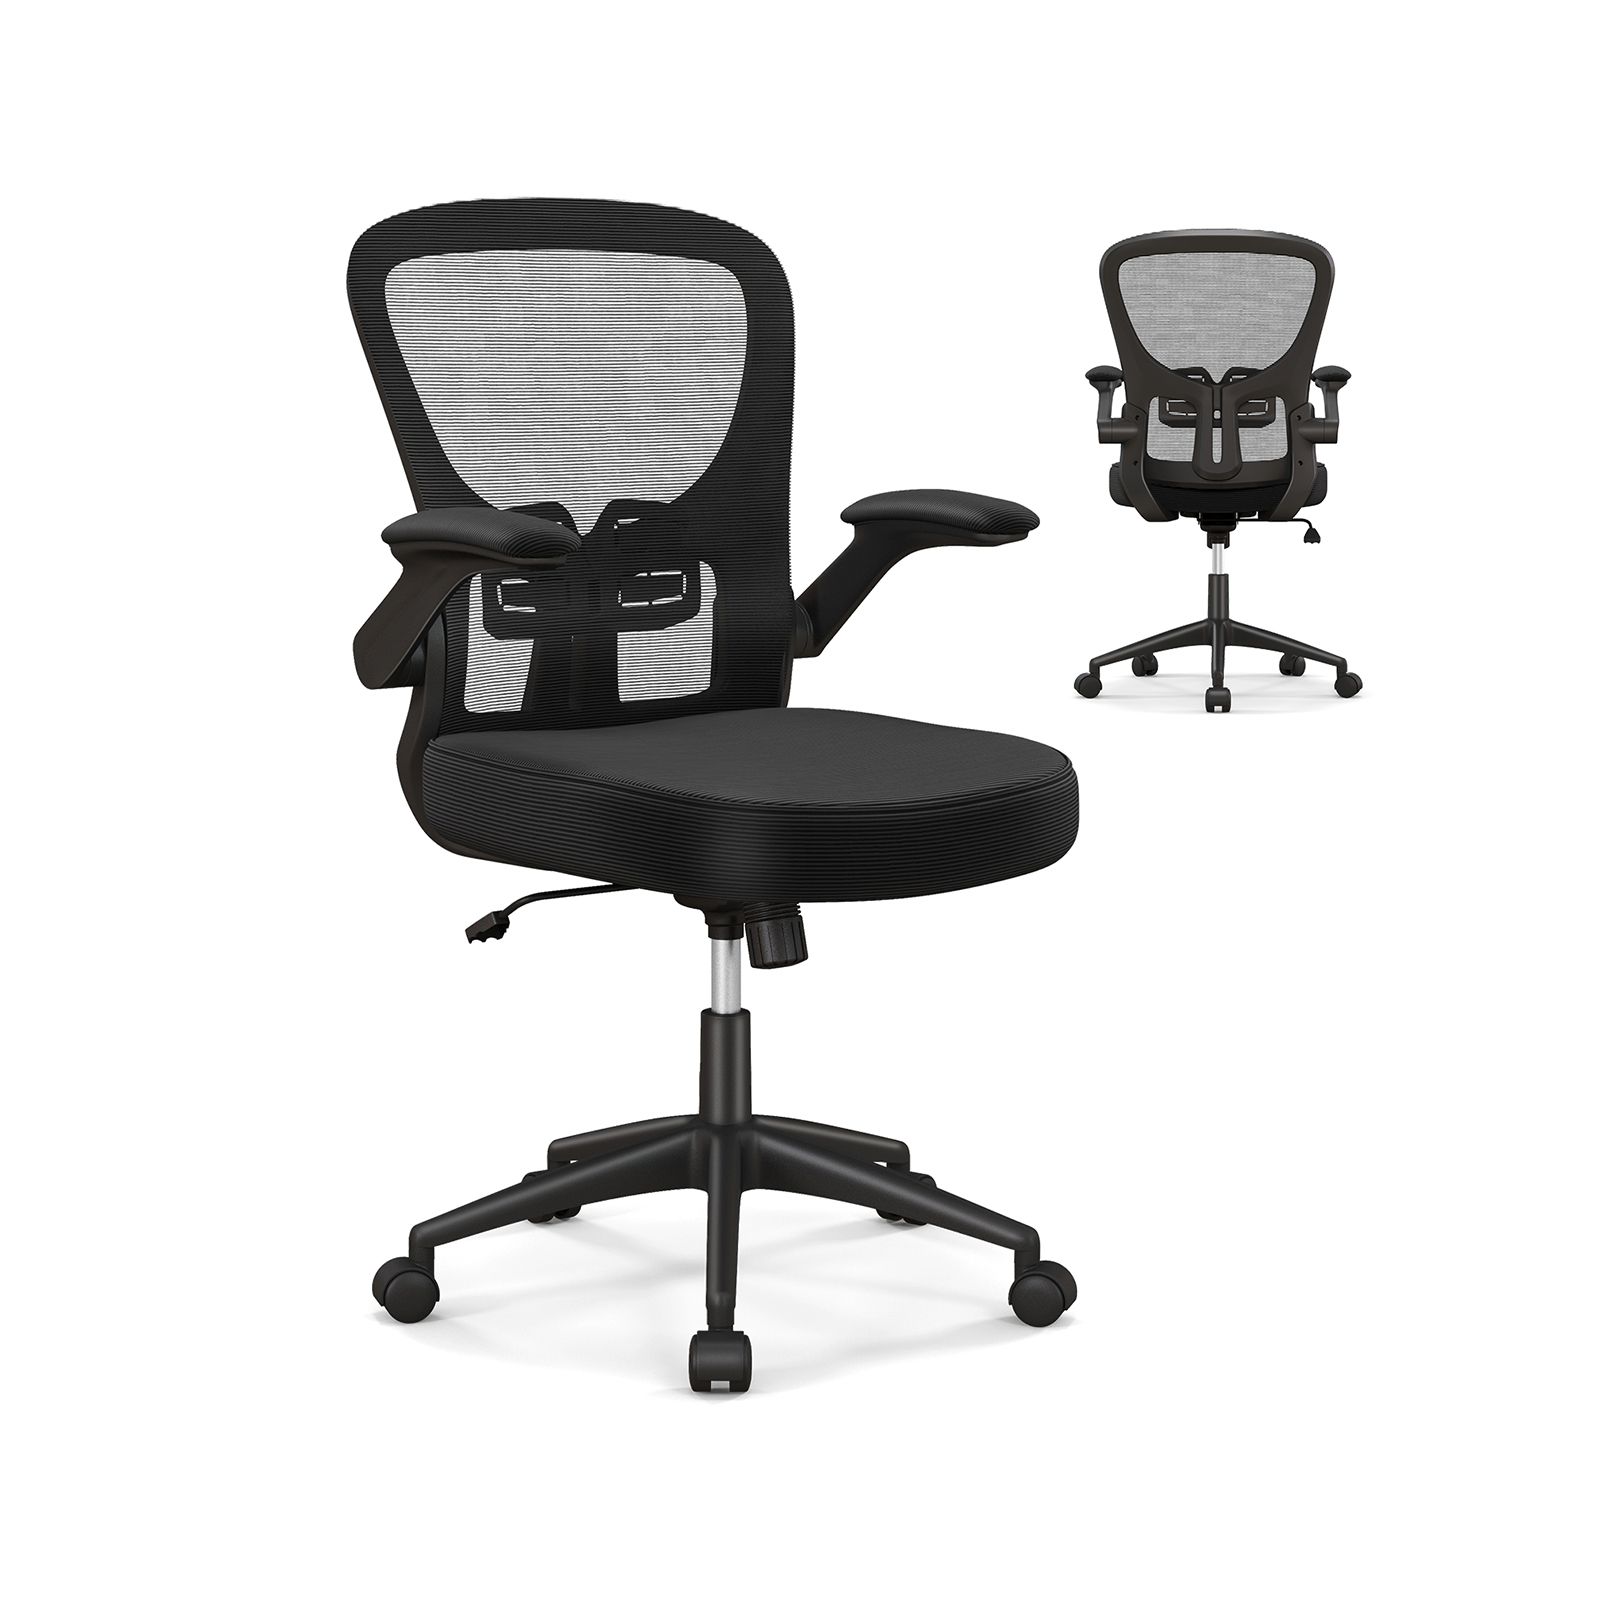 Ergonomic Office Chair Adjustable Swivel Mesh Task Chair with Flip-Up Armrests